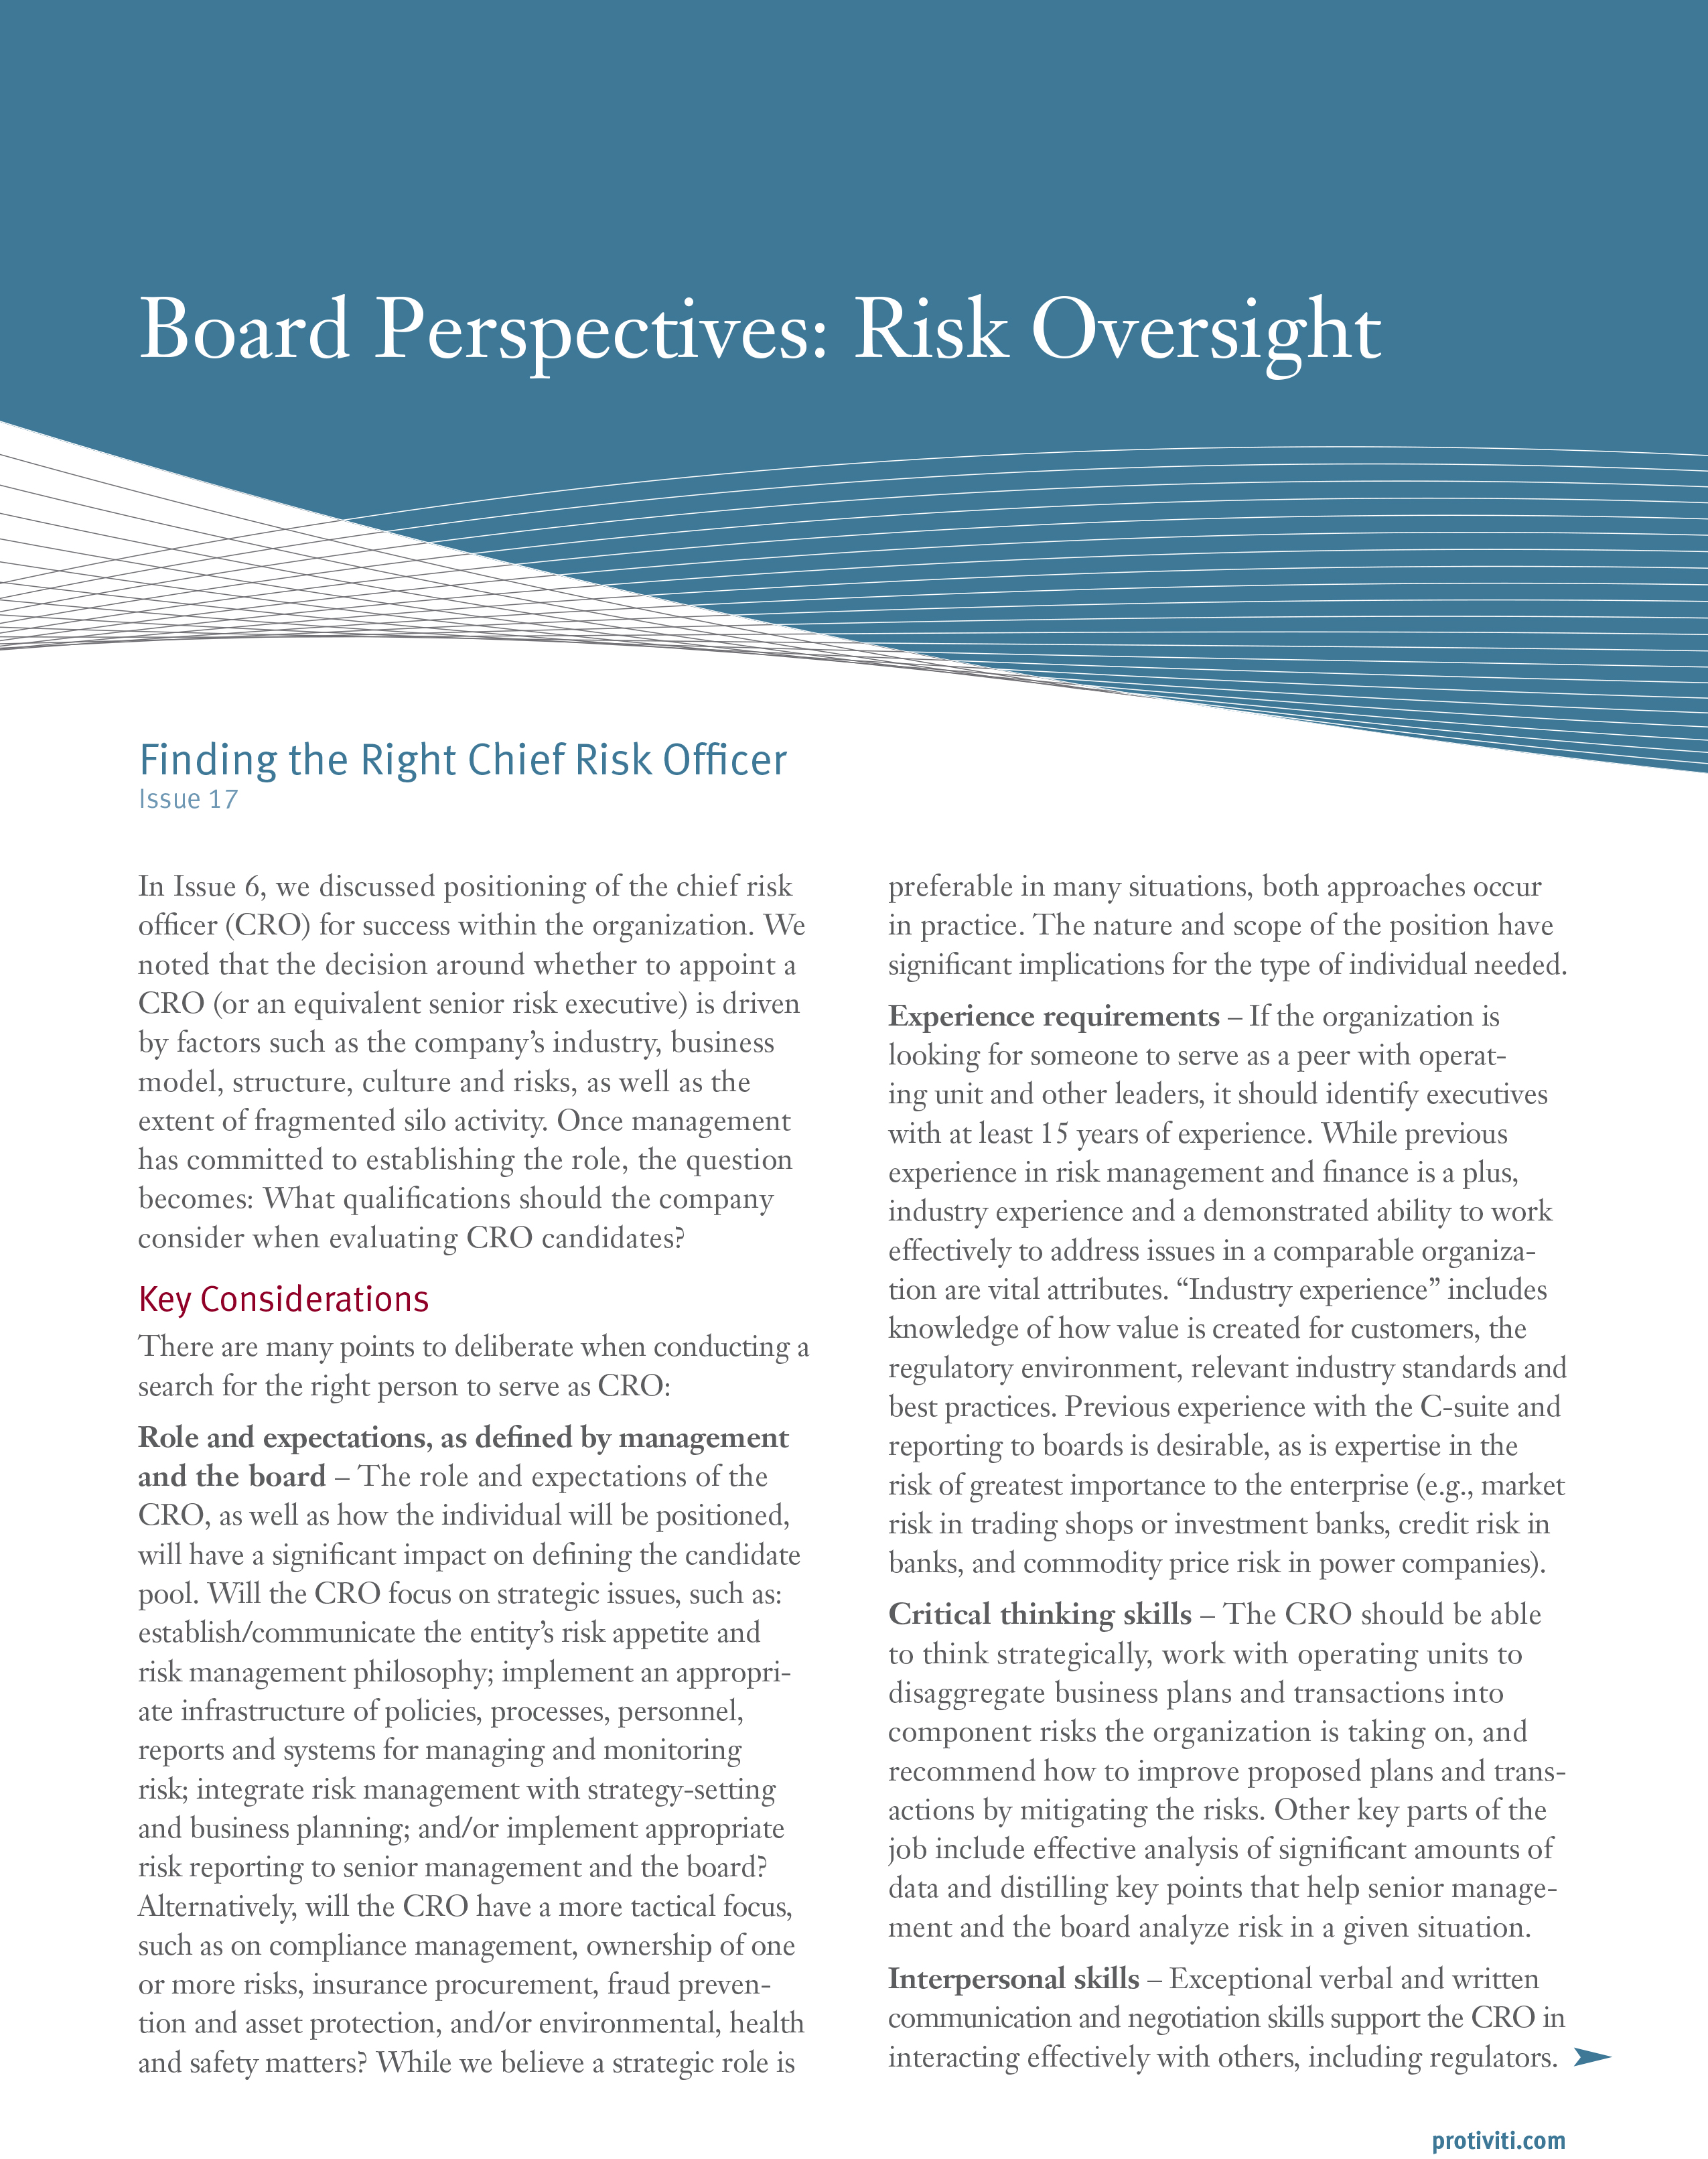 Screenshot of the first page of Finding the Right Chief Risk Officer